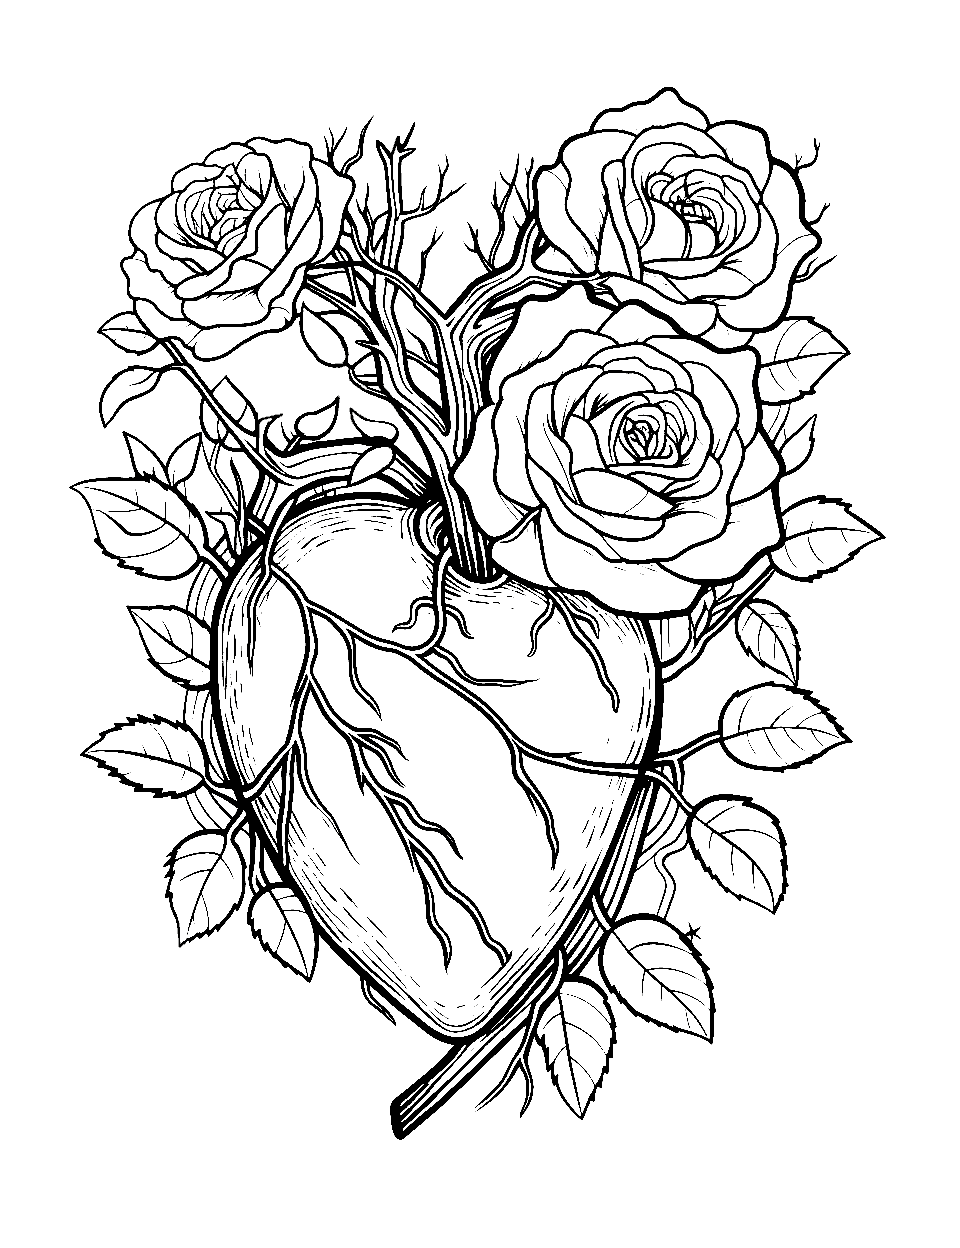 Broken Heart Mended by Roses Coloring Page - A heart with roses growing through the crevice symbolizing healing through nature.